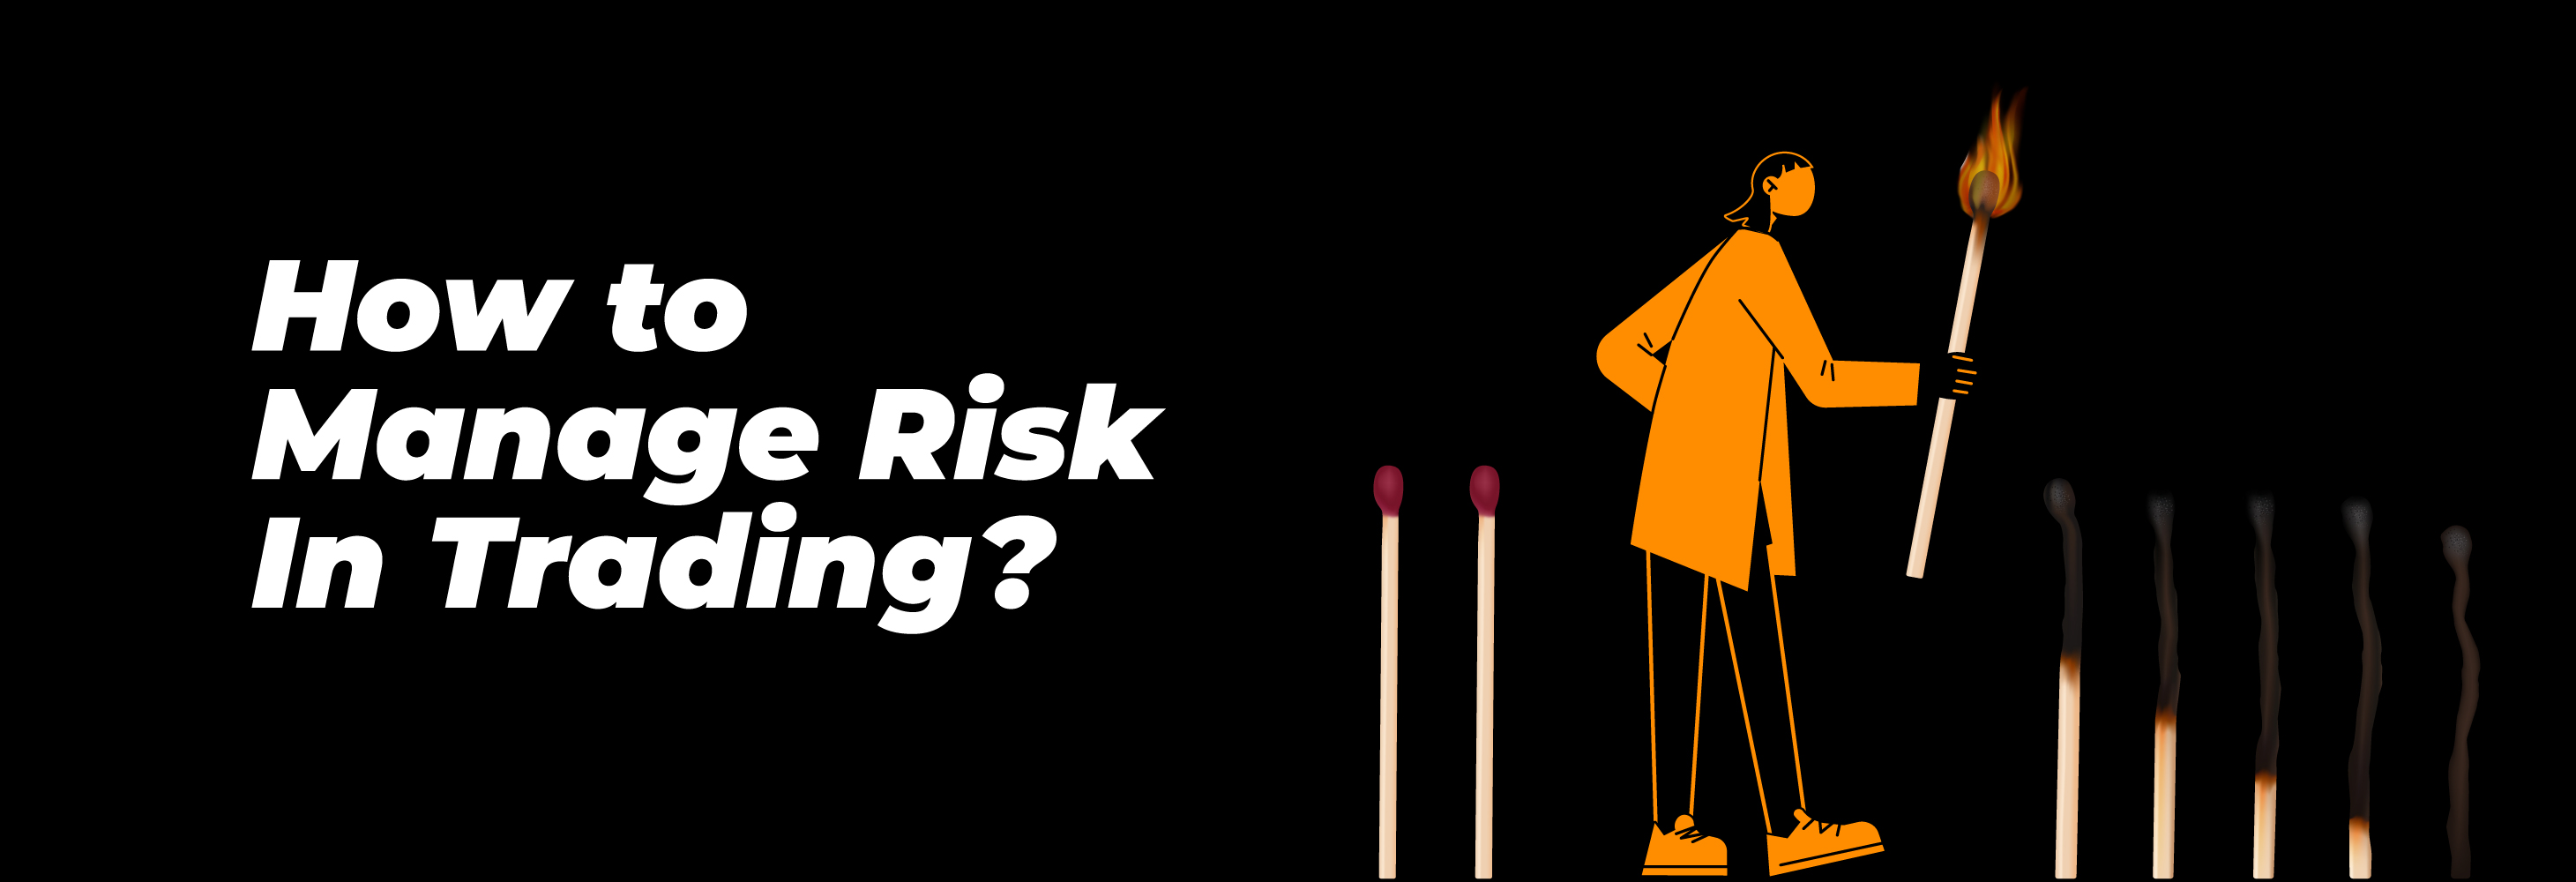 How to Manage Risk In Trading?